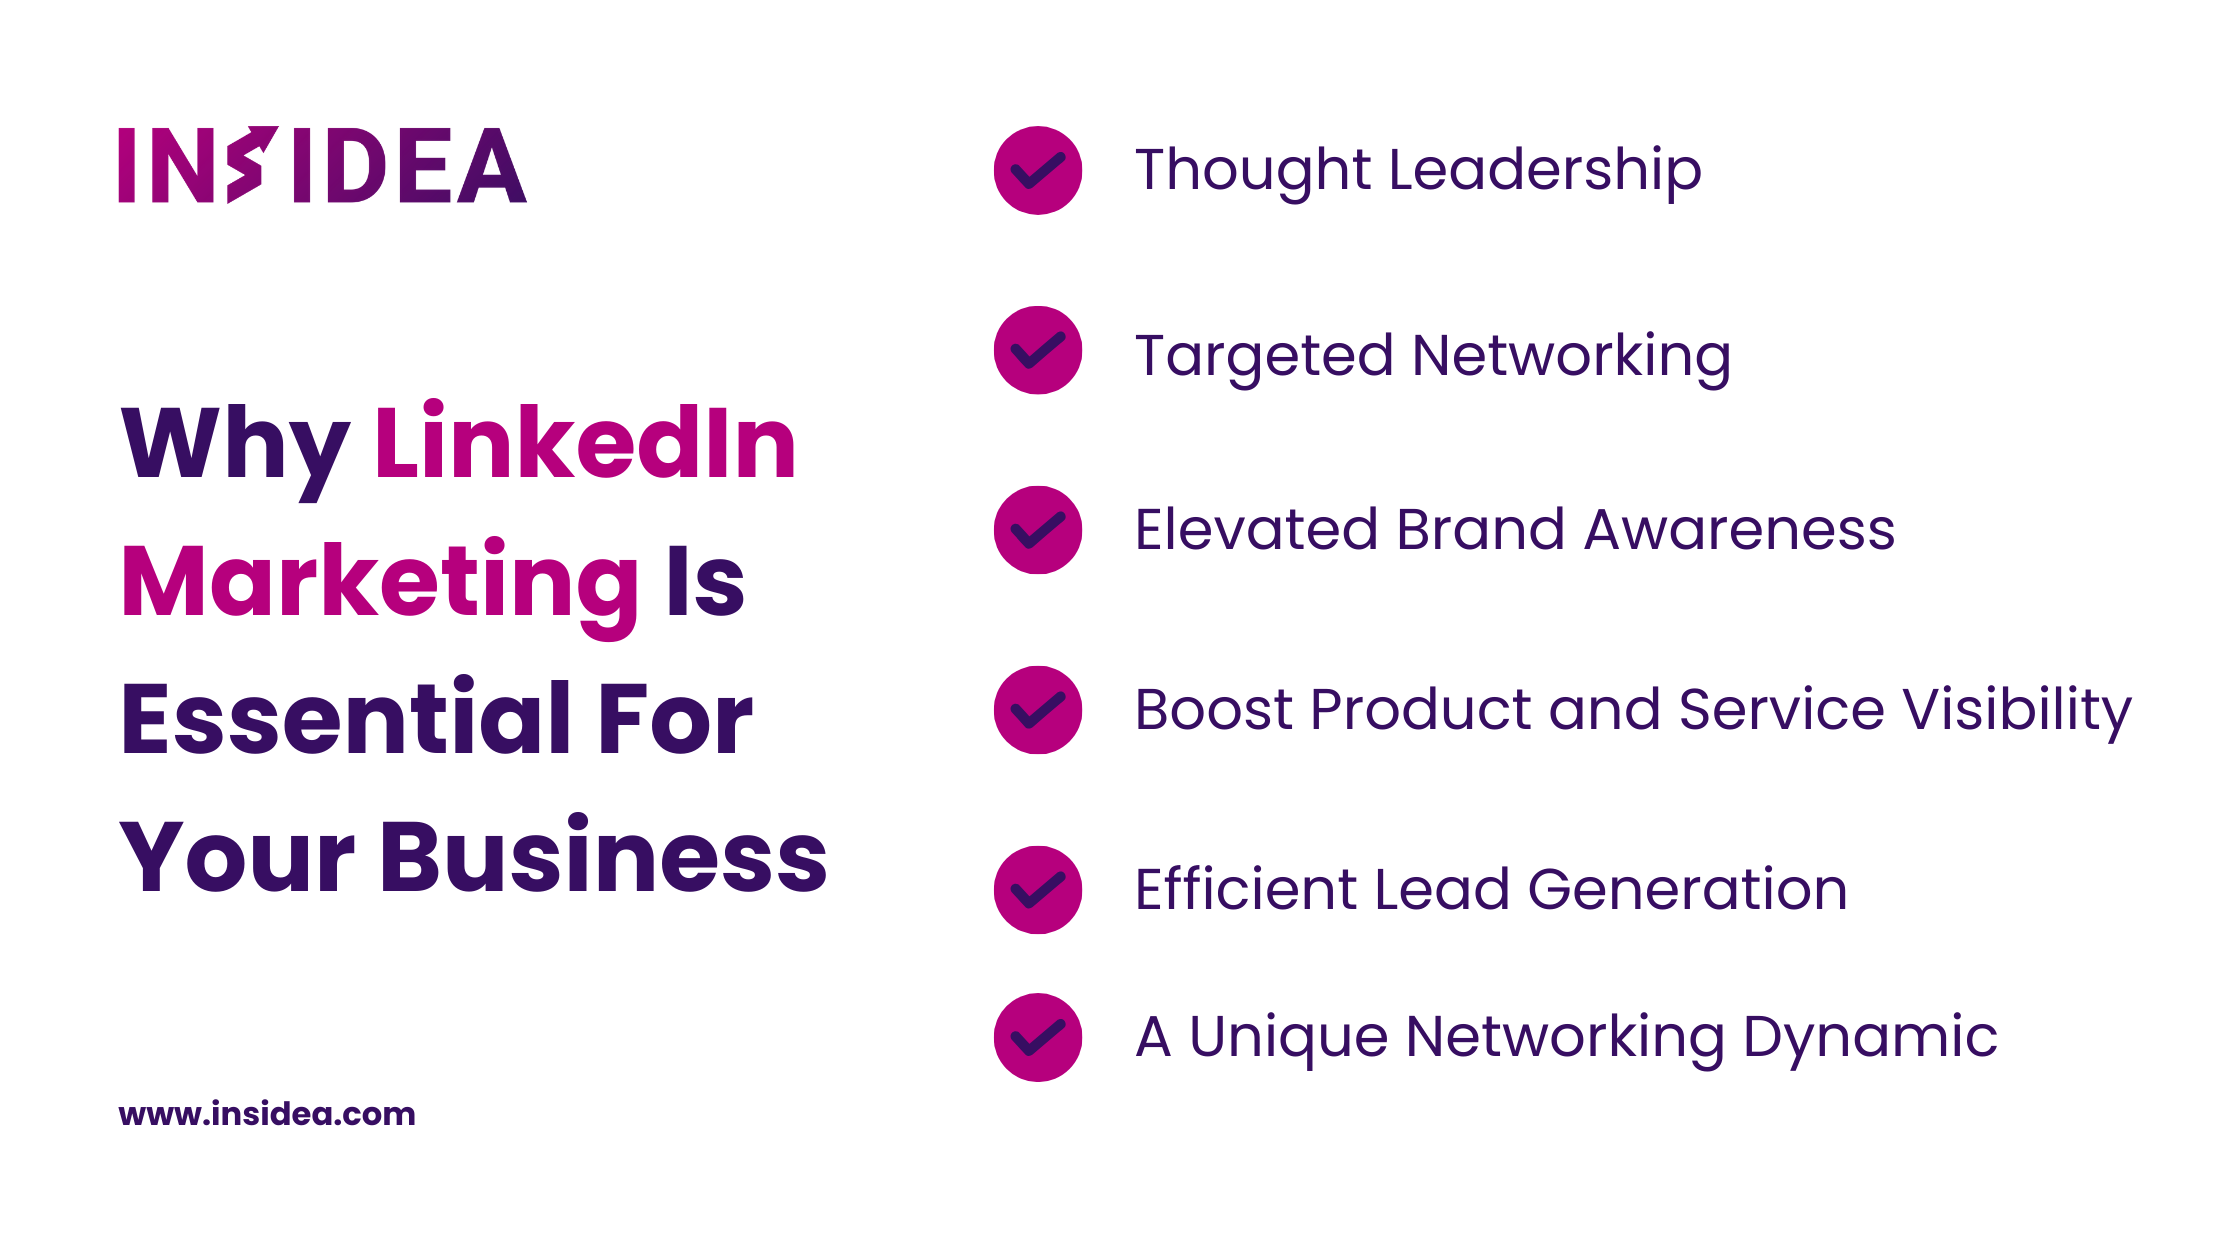 Why LinkedIn Marketing Is Essential For Your Business